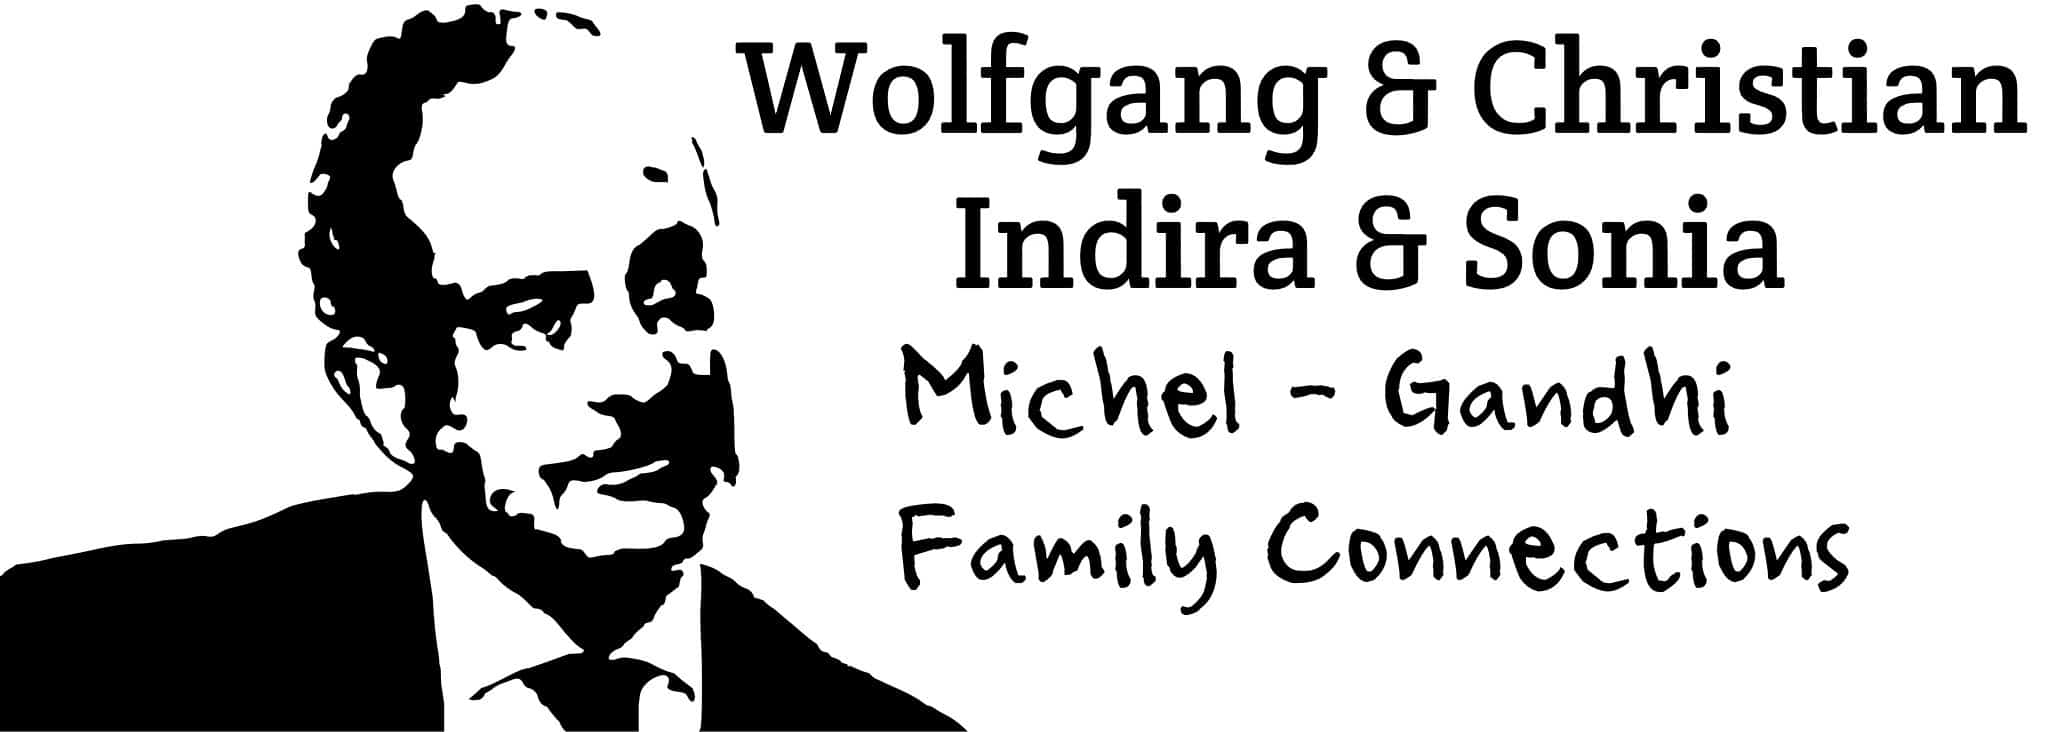 Who was Christian’s Father and Indira Gandhi’s friend, Wolfgang Michel?